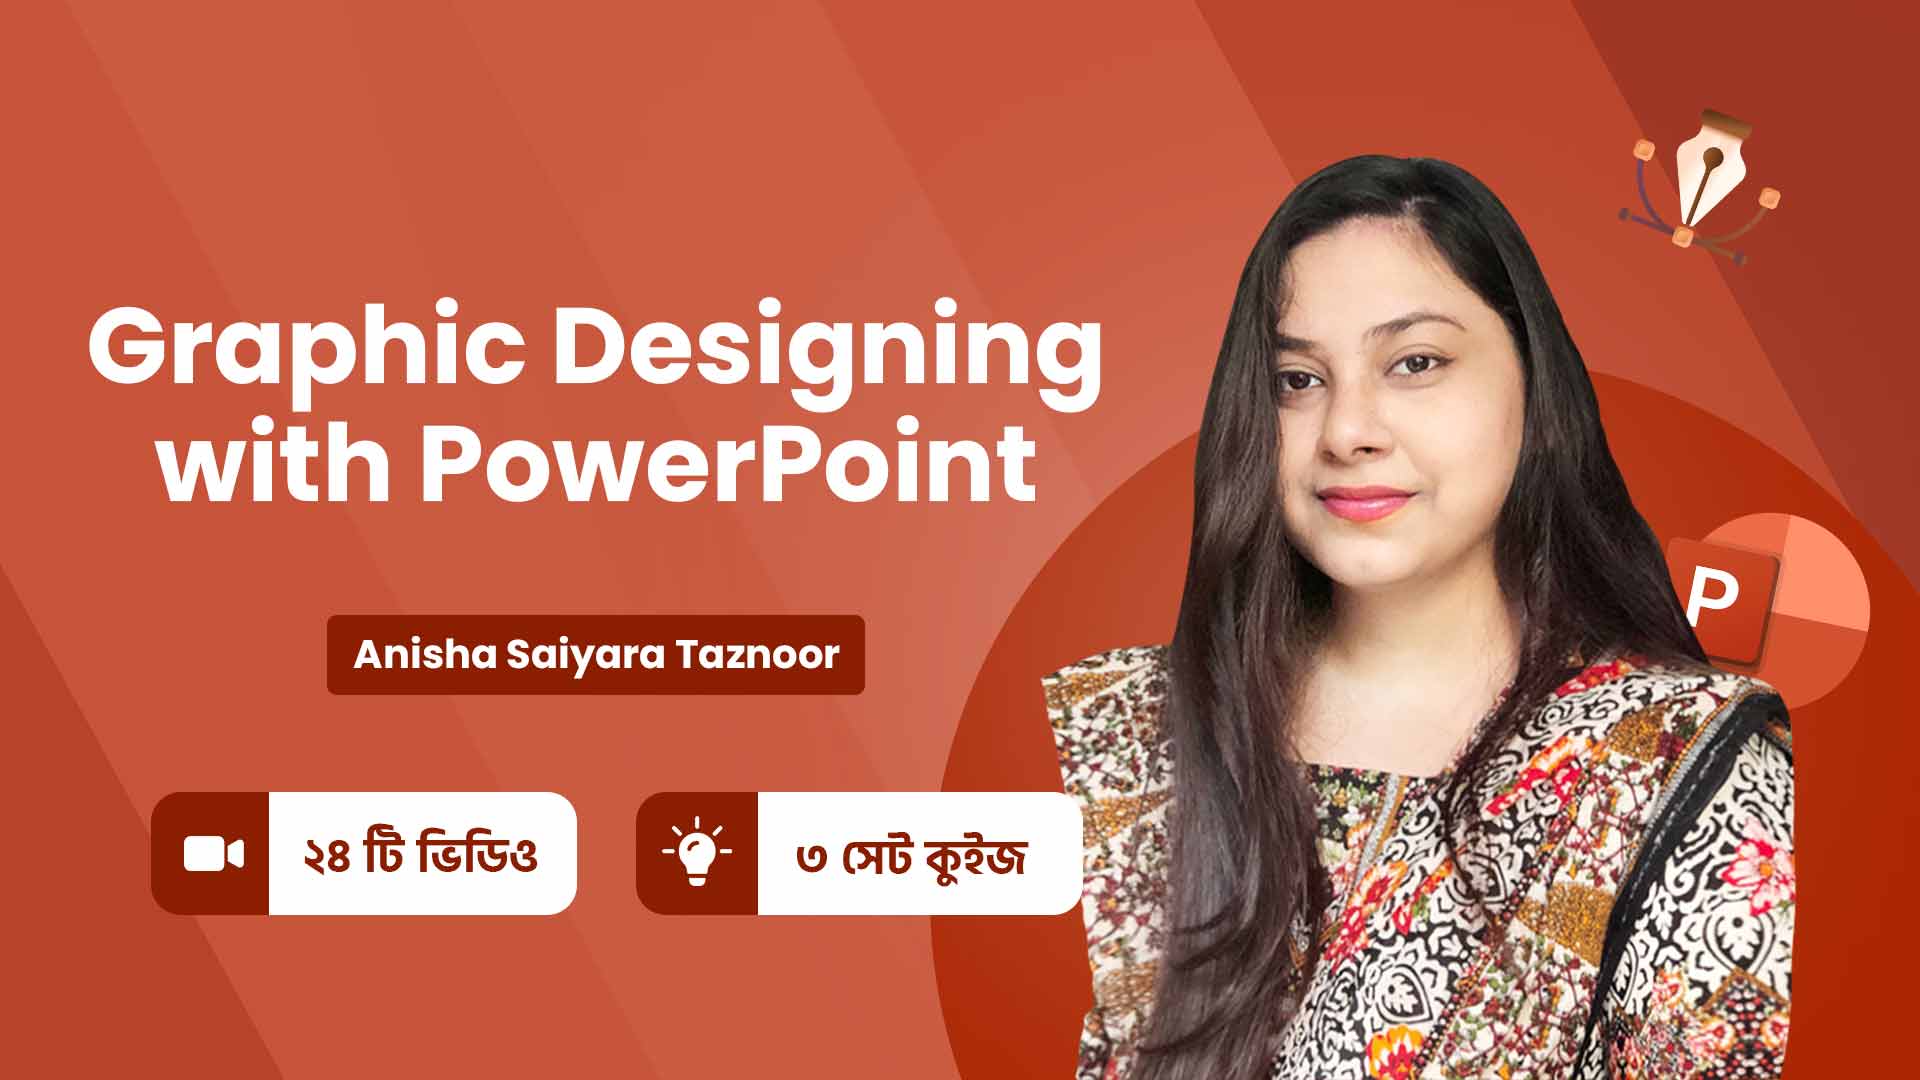 Graphic Designing with PowerPoint Course Thumbnail High Quality